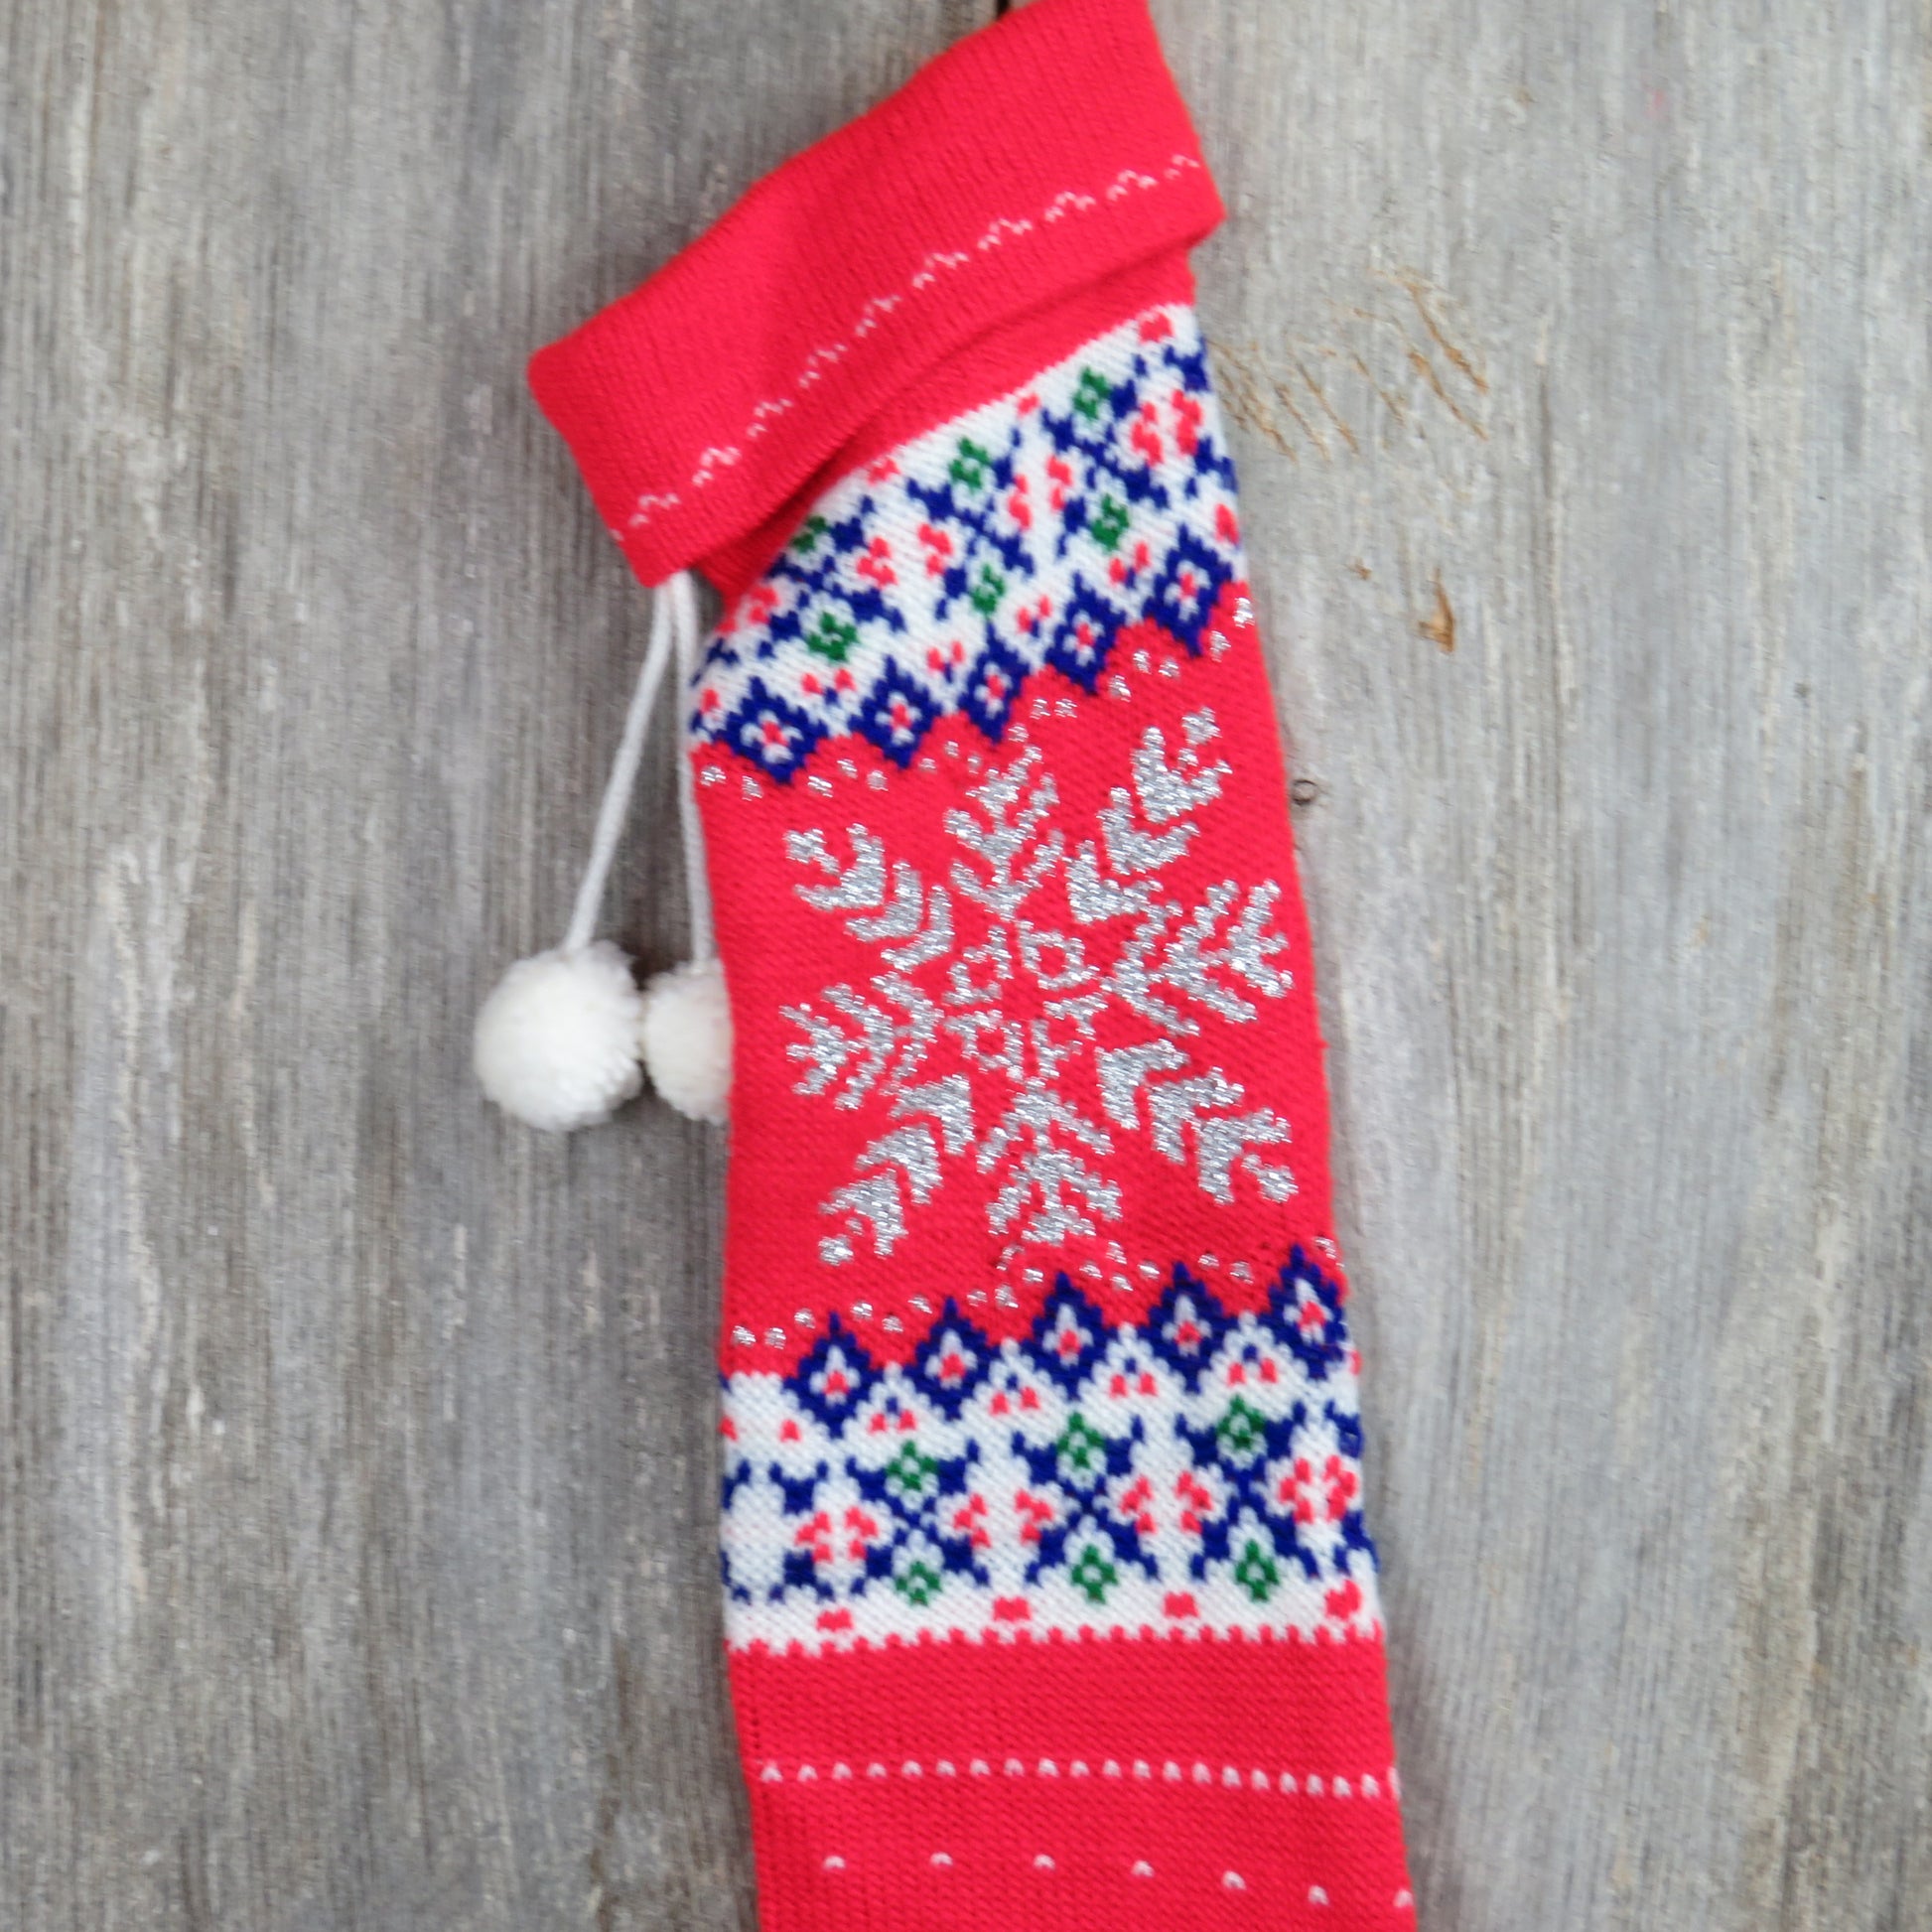 Snowflake Christmas Stocking Vintage Knit Red Silver Glitter Thread Knitted 1980s - At Grandma's Table